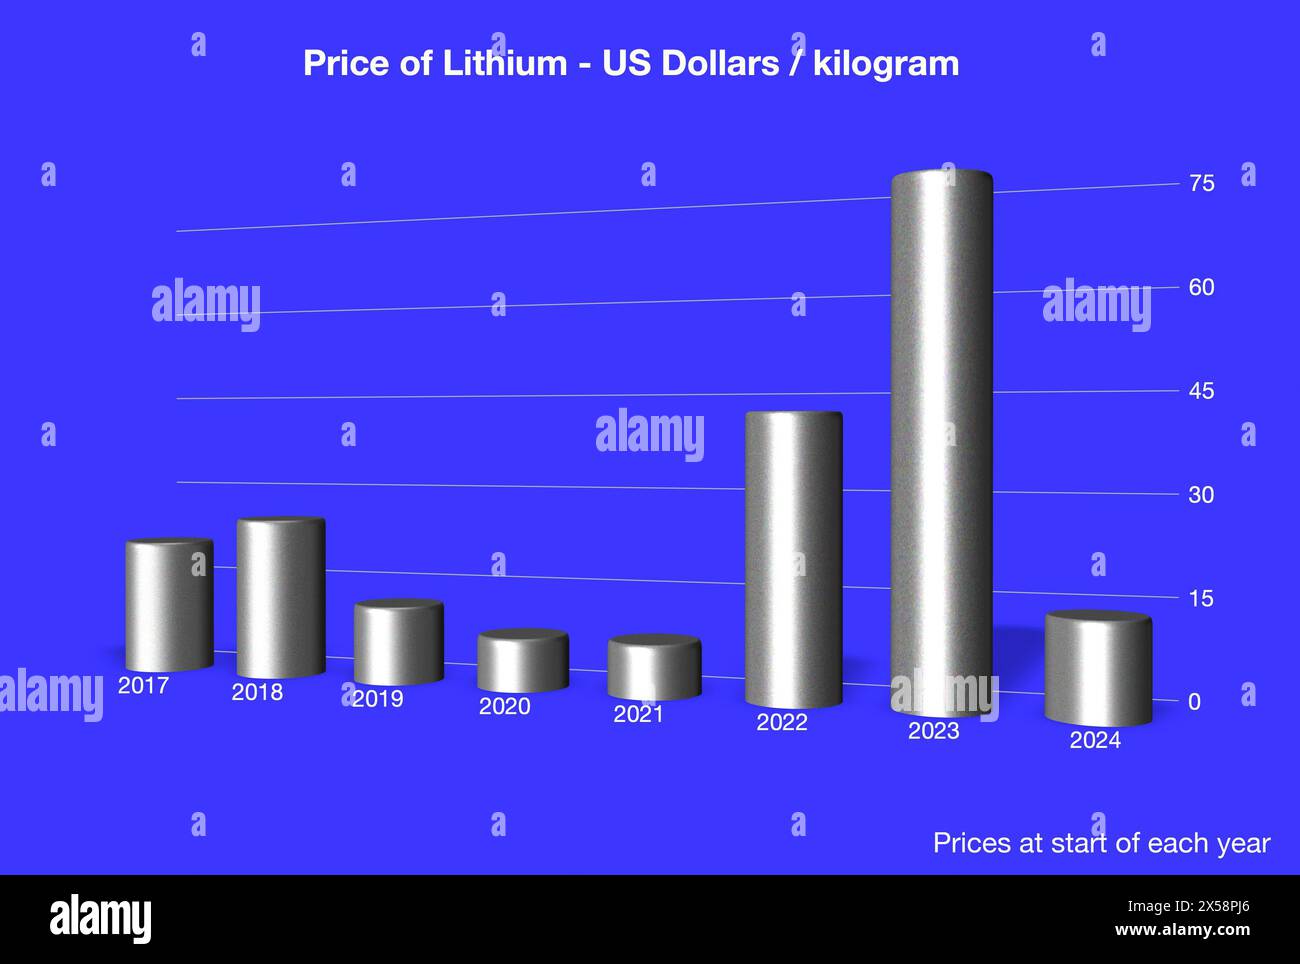 Lithium price bar chart / graph with 3D effect showing actual price in US Dollars at the start of each year from 2017-2024 Stock Photo